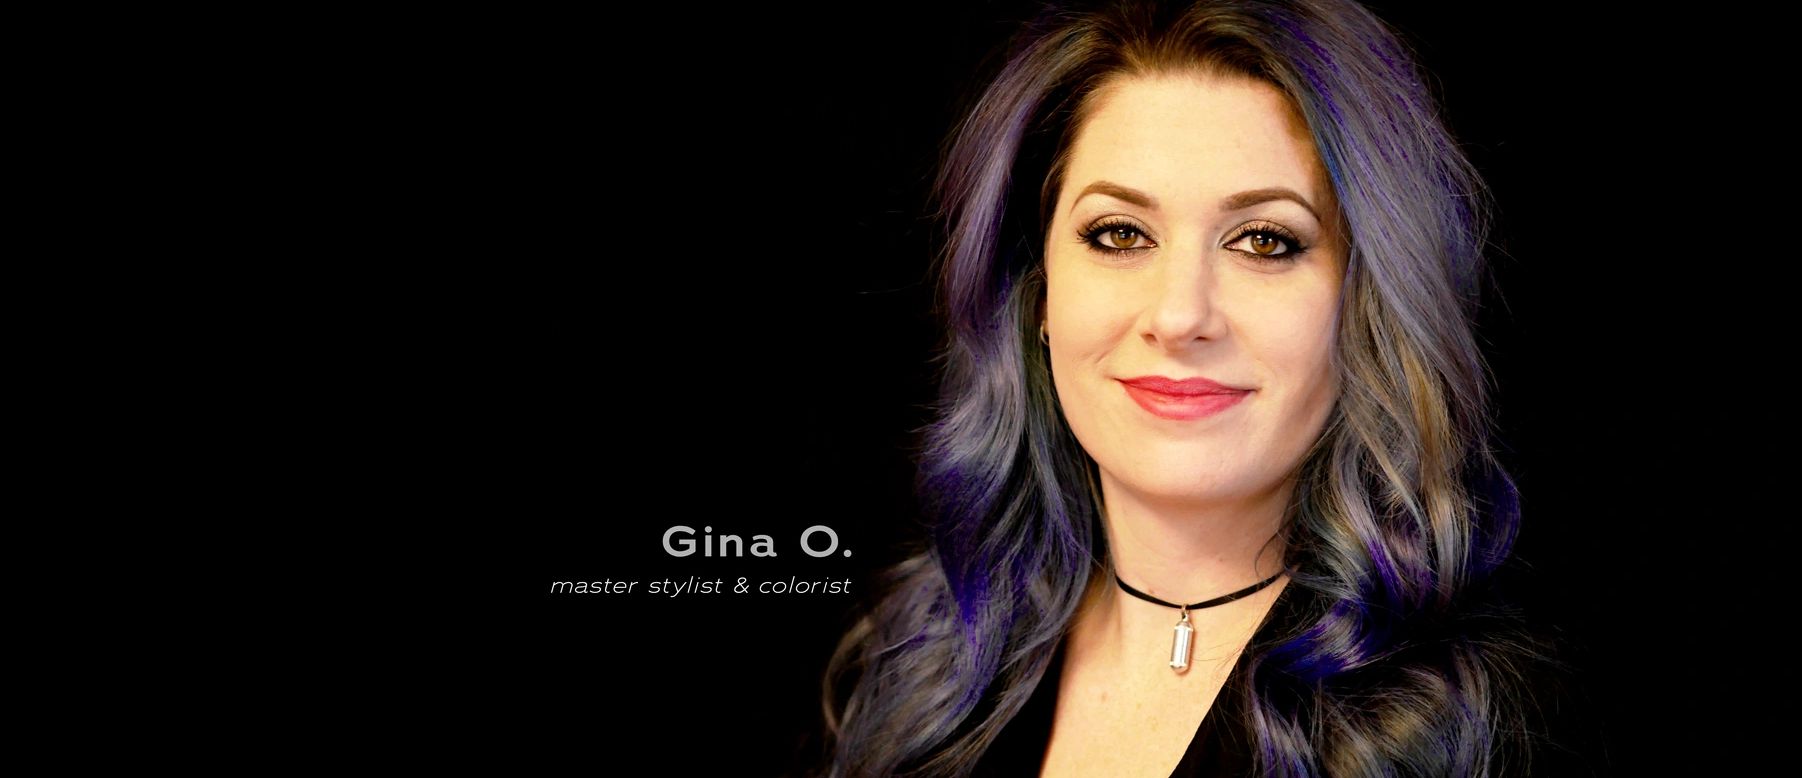 Gina Oxenford, Owner of Prism Studio Salon & Co-Founder of Kyle's Wish Foundation